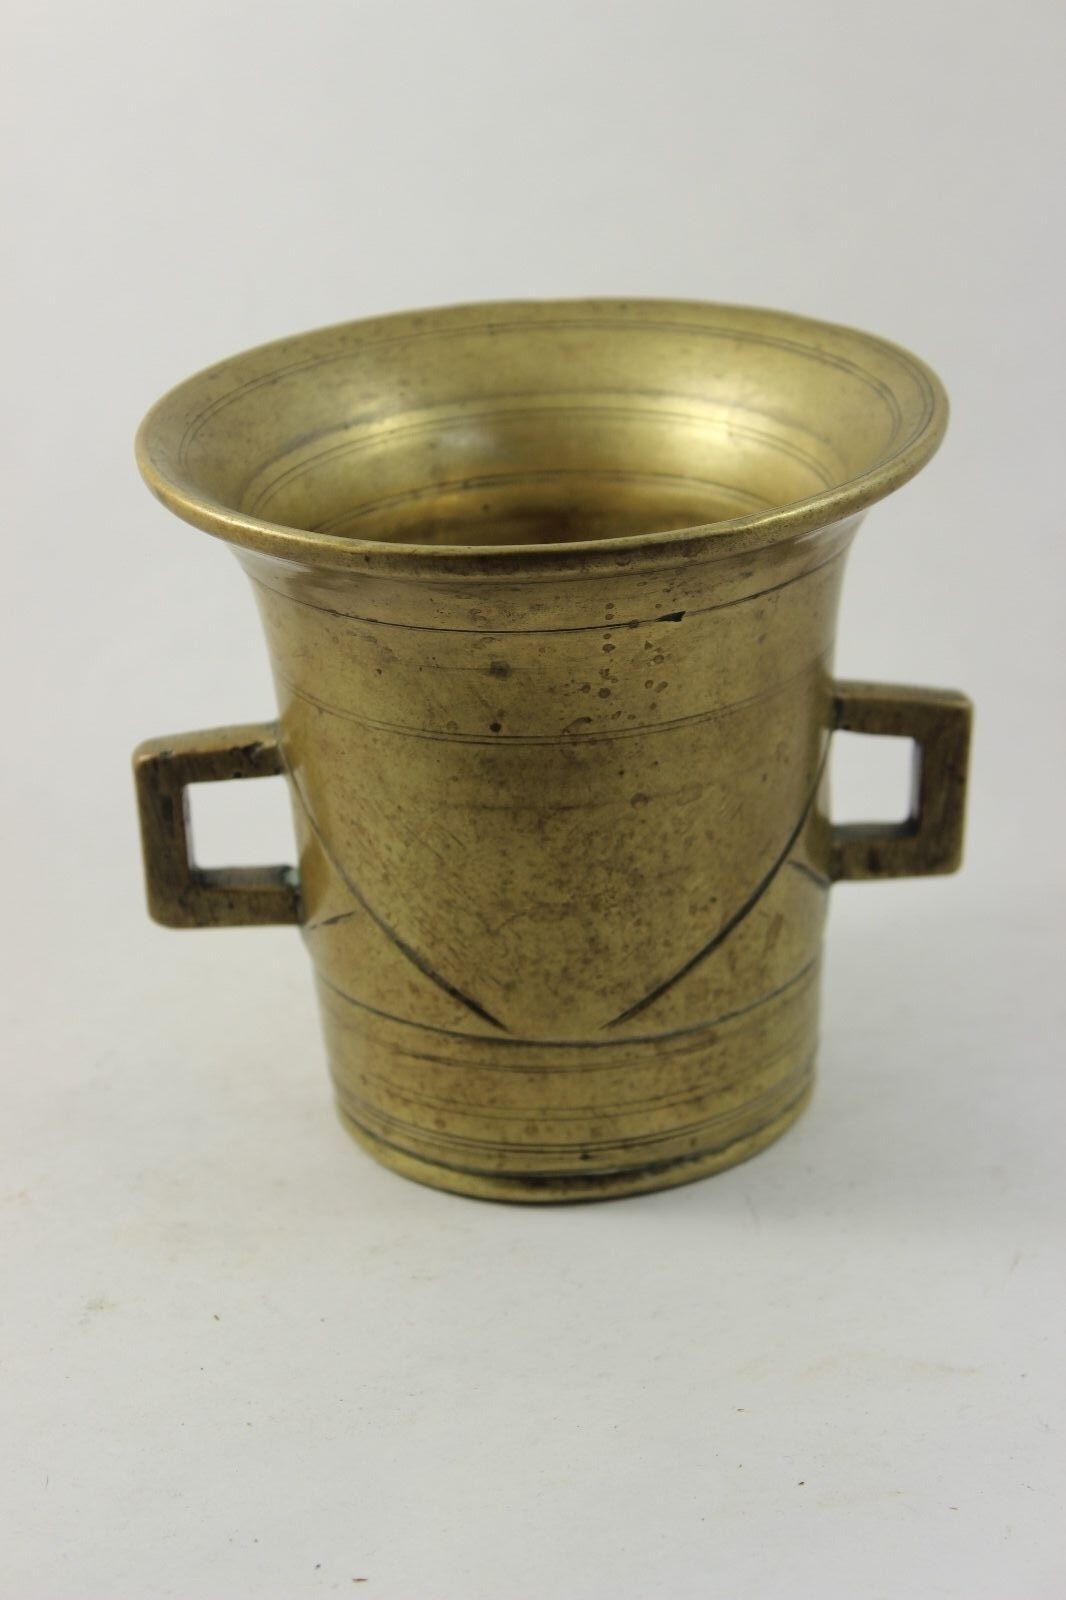 Antique Heavy Brass Mortar used to Grind Powders